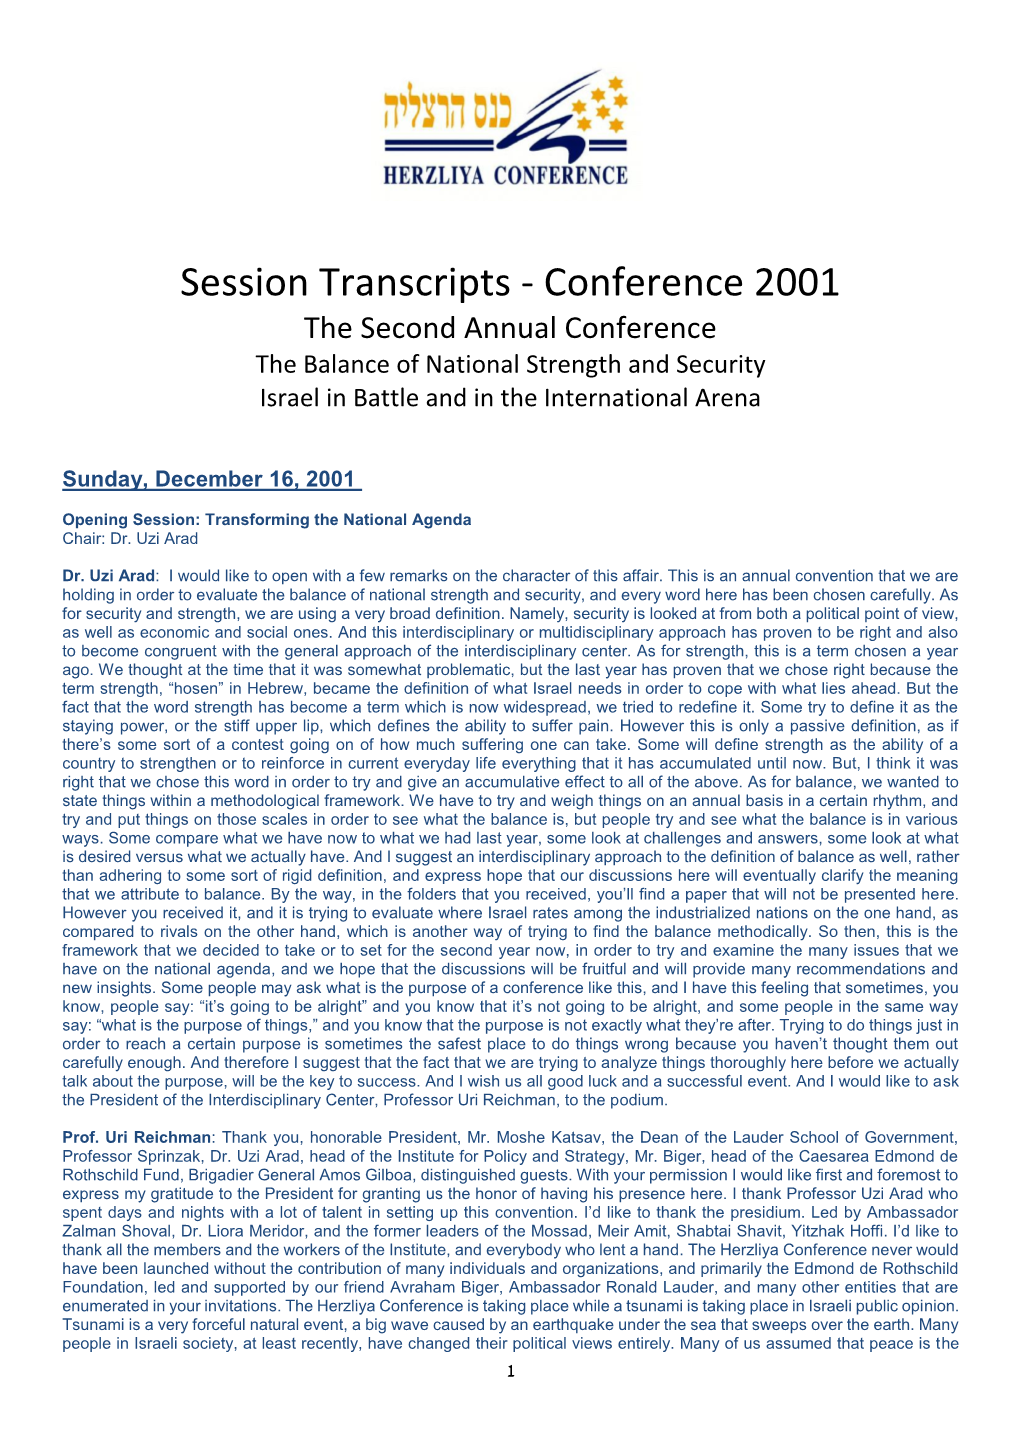 Session Transcripts - Conference 2001 the Second Annual Conference the Balance of National Strength and Security Israel in Battle and in the International Arena